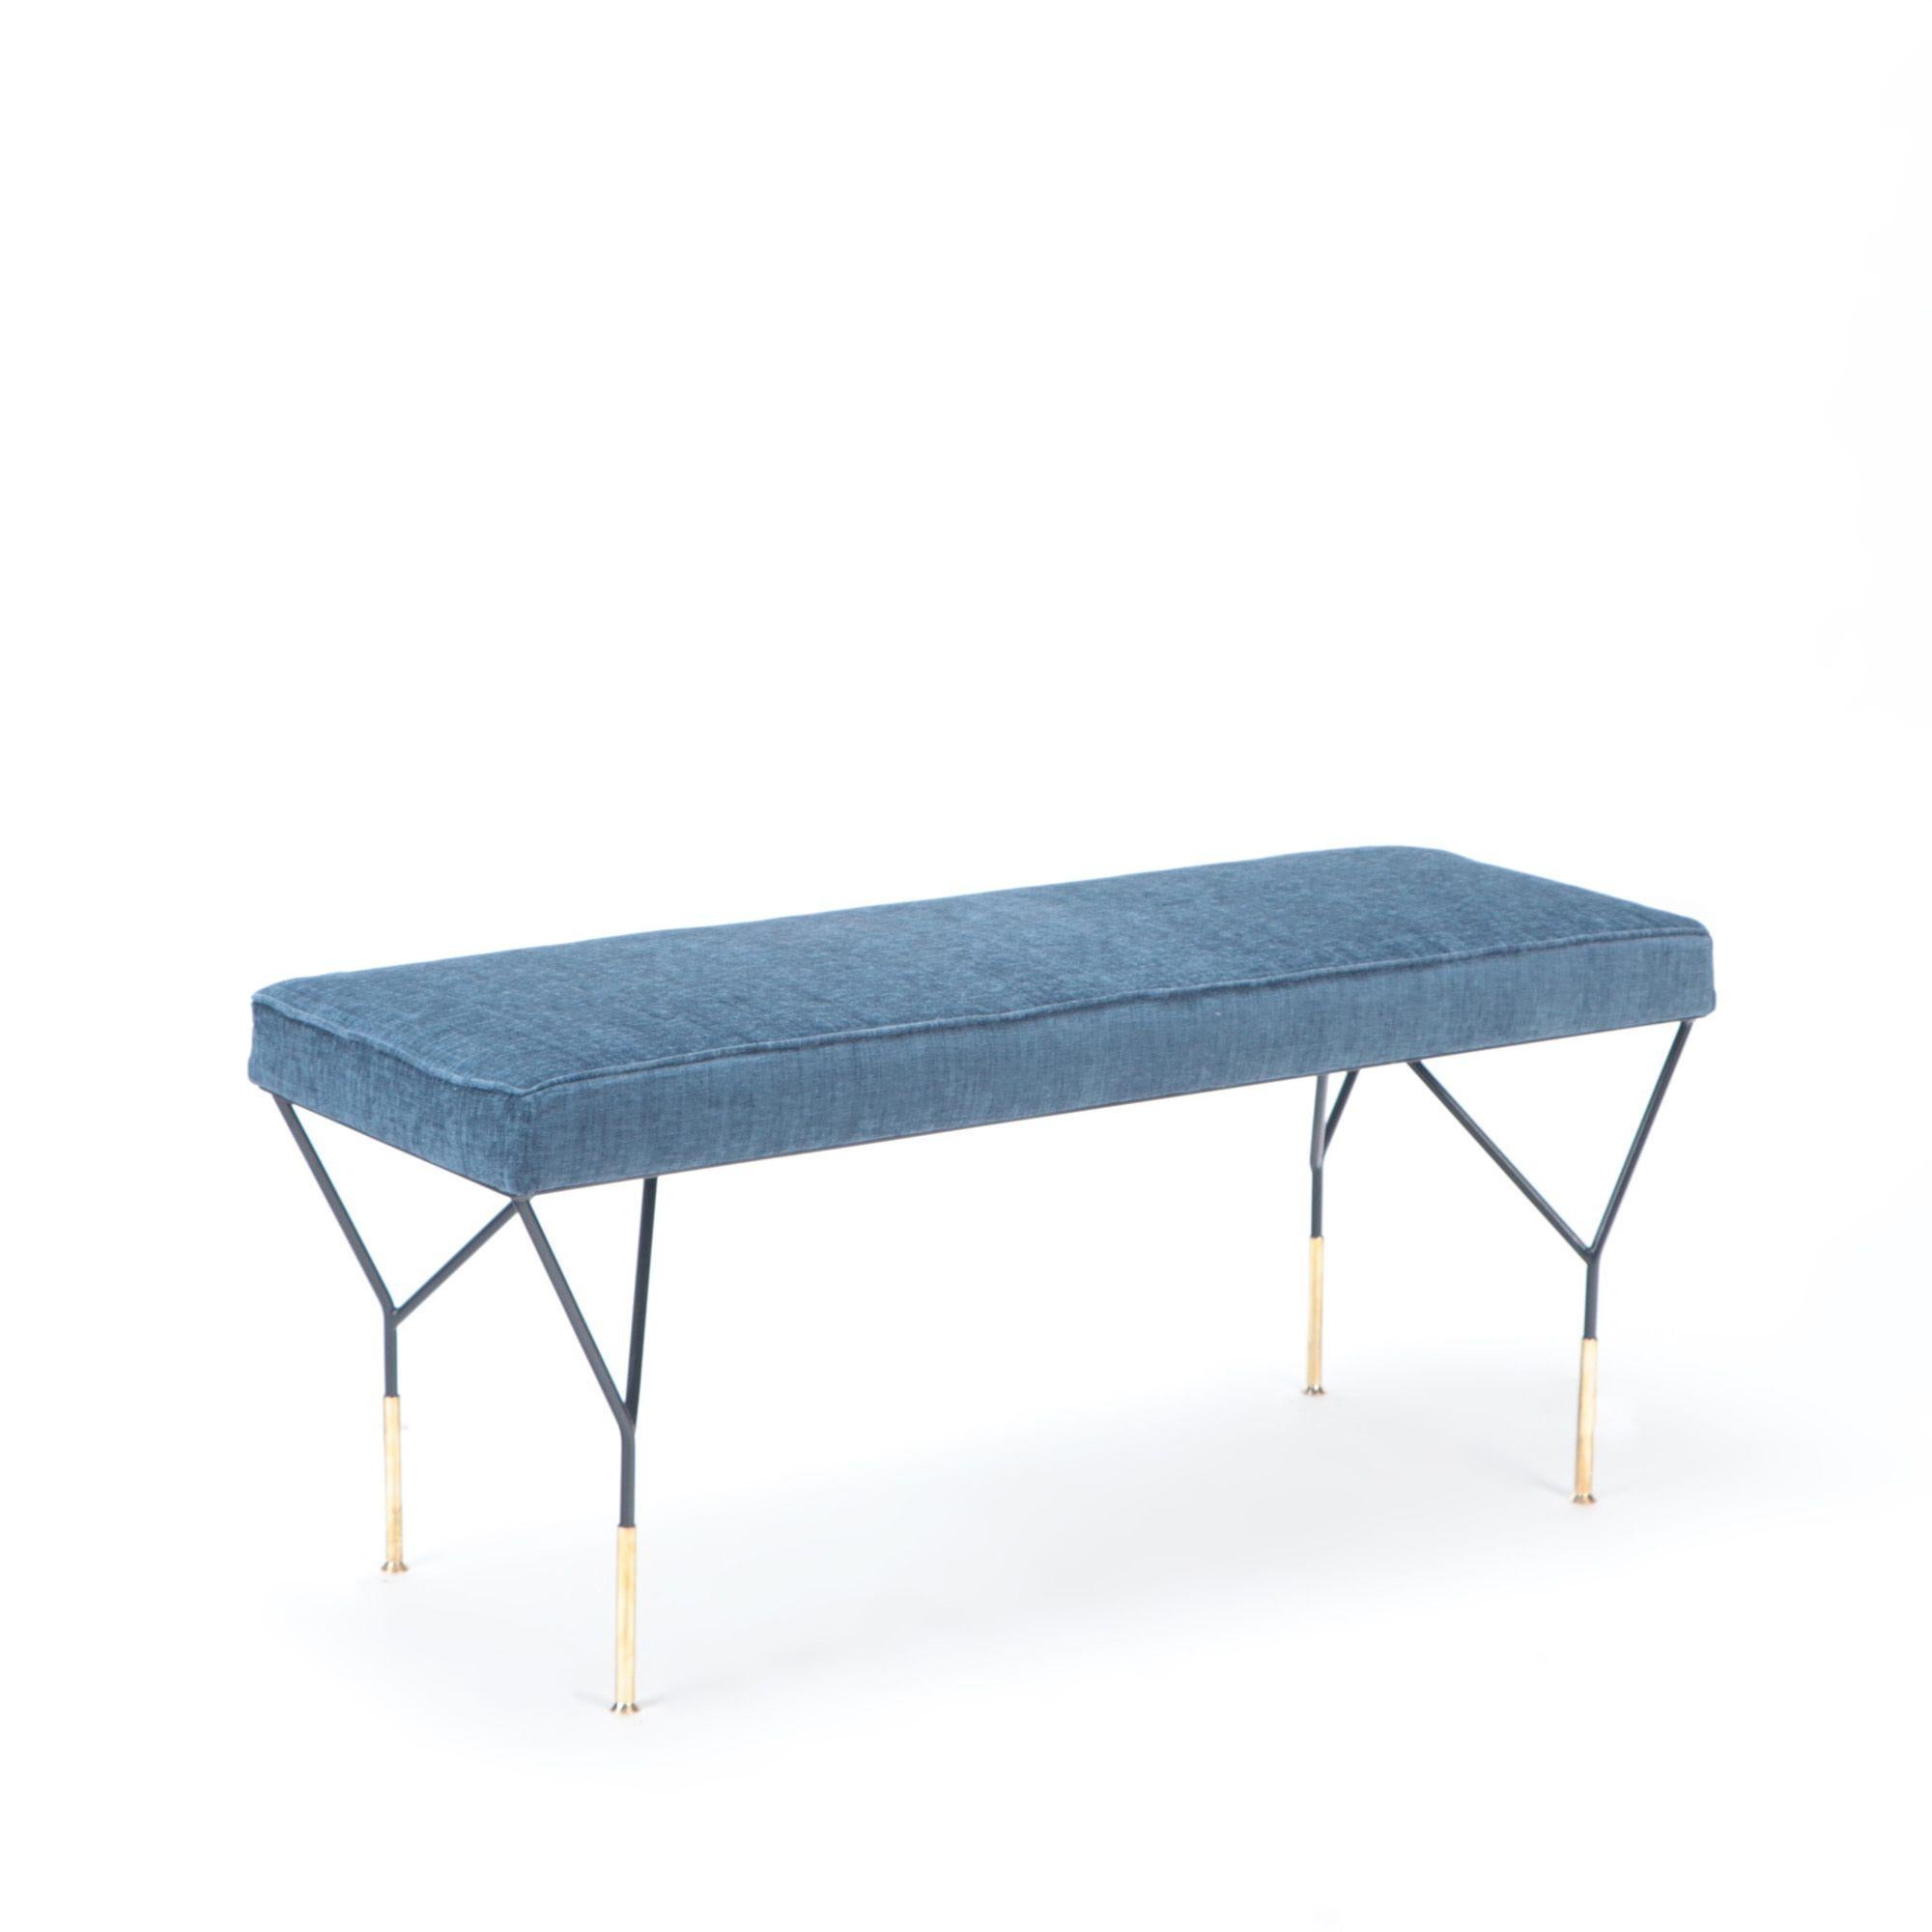 Italian Contemporary Metal and Brass Benche with Blue Cushion 1